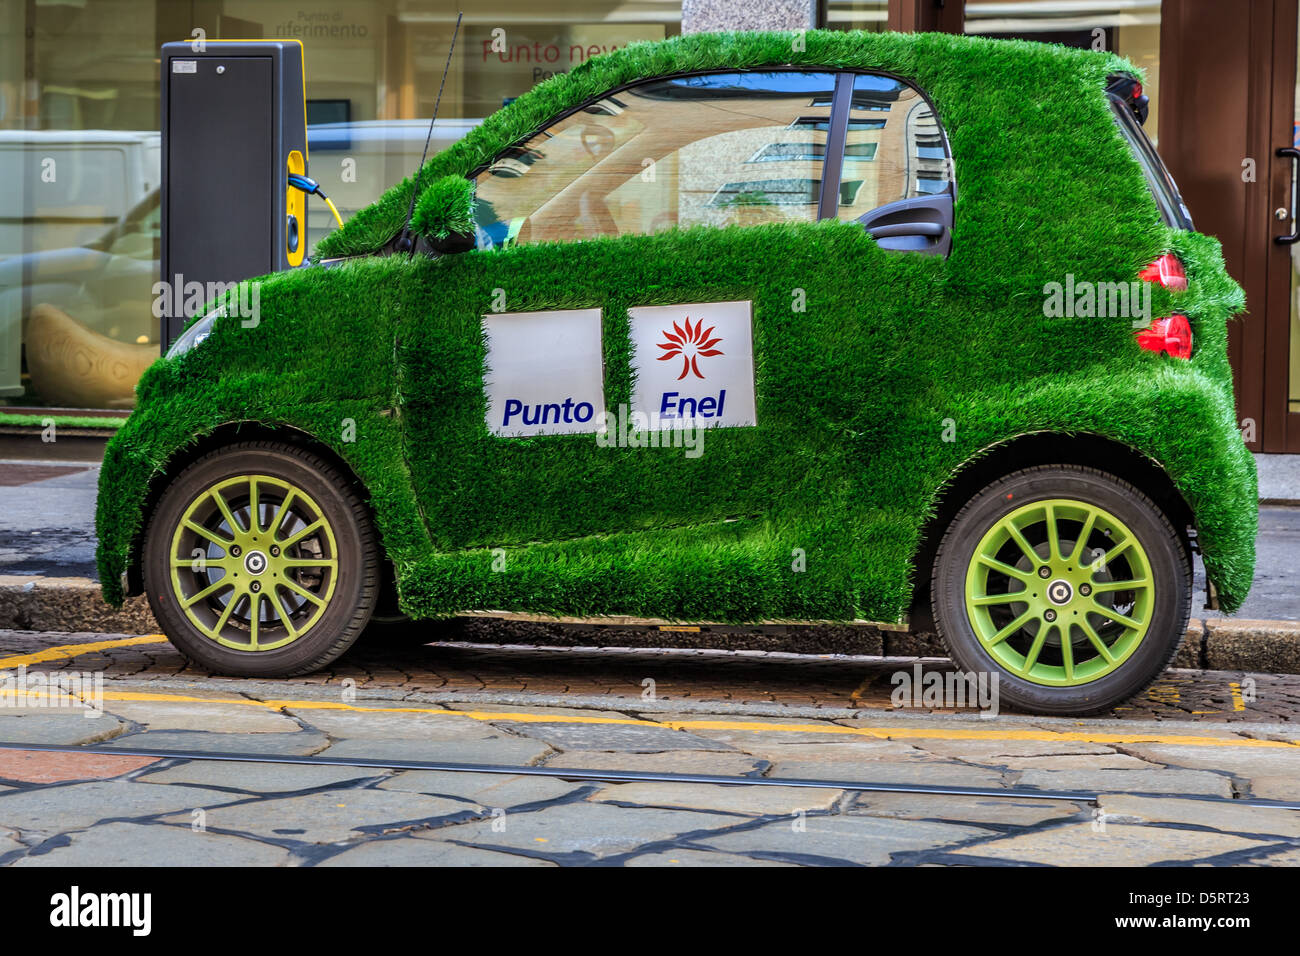 An electric Smart car with grass cover and Punto Enel markings, Milan, Italy Stock Photo